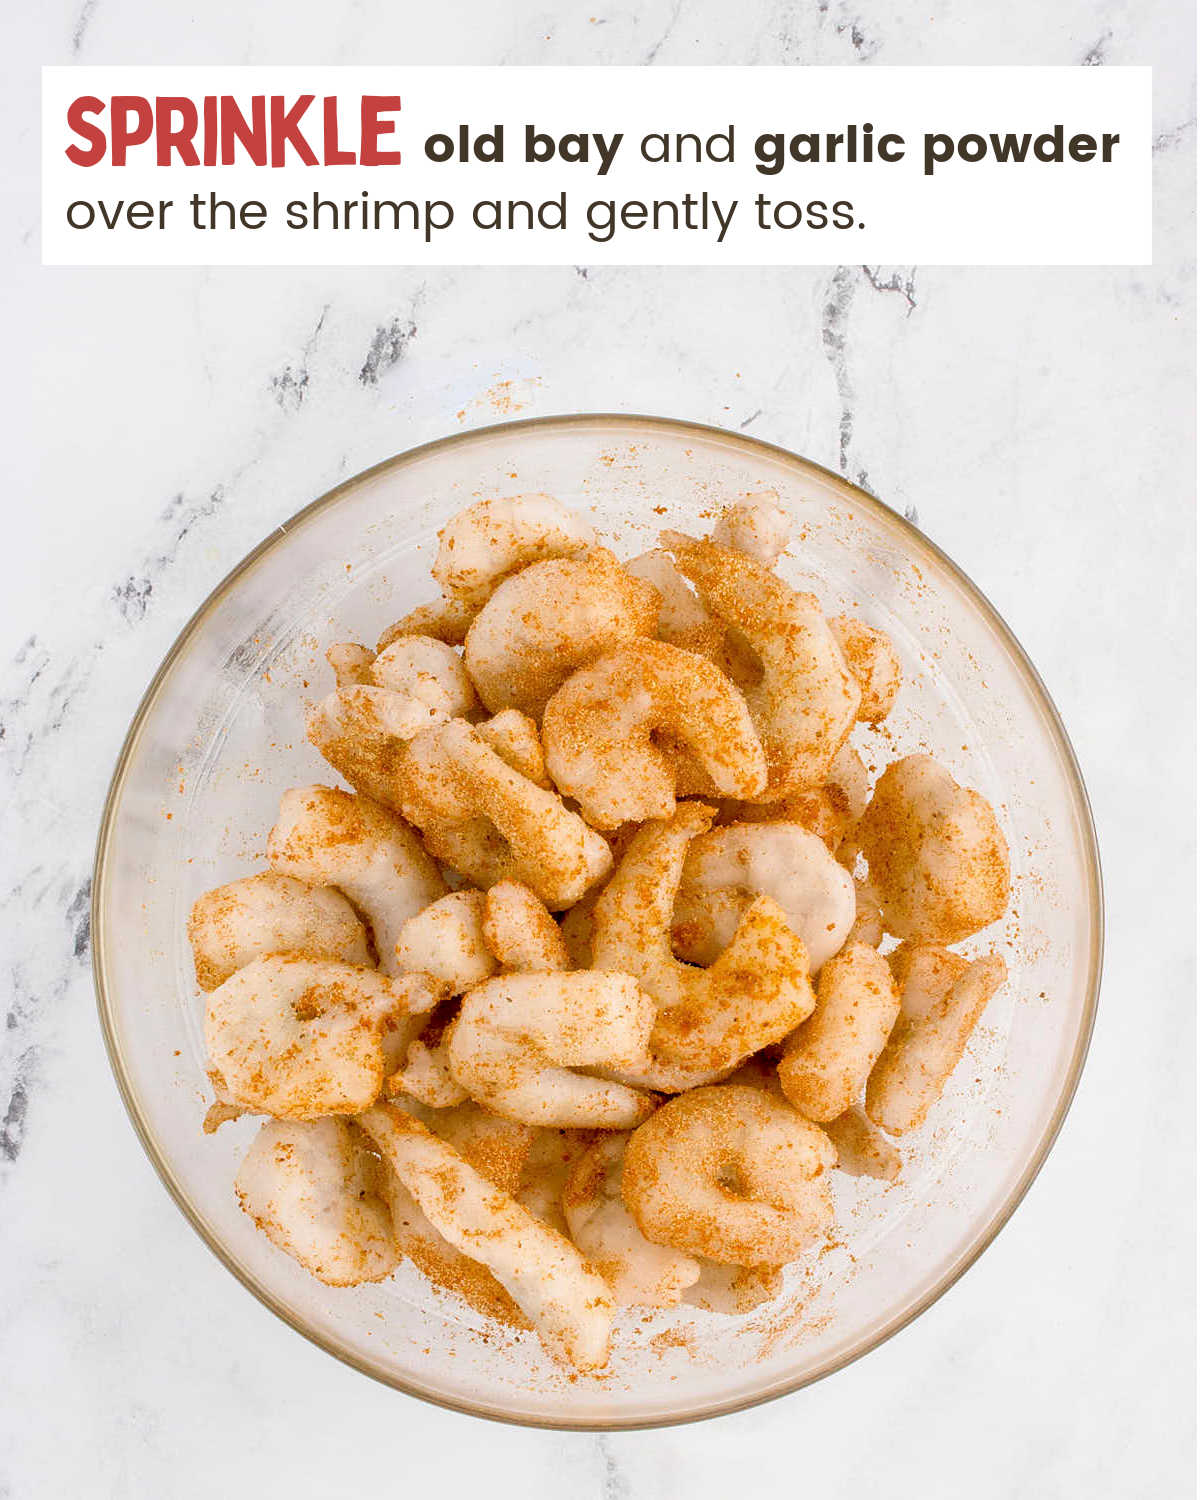 A bowl of shrimp with a sprinkle of old bay and garlic powder.